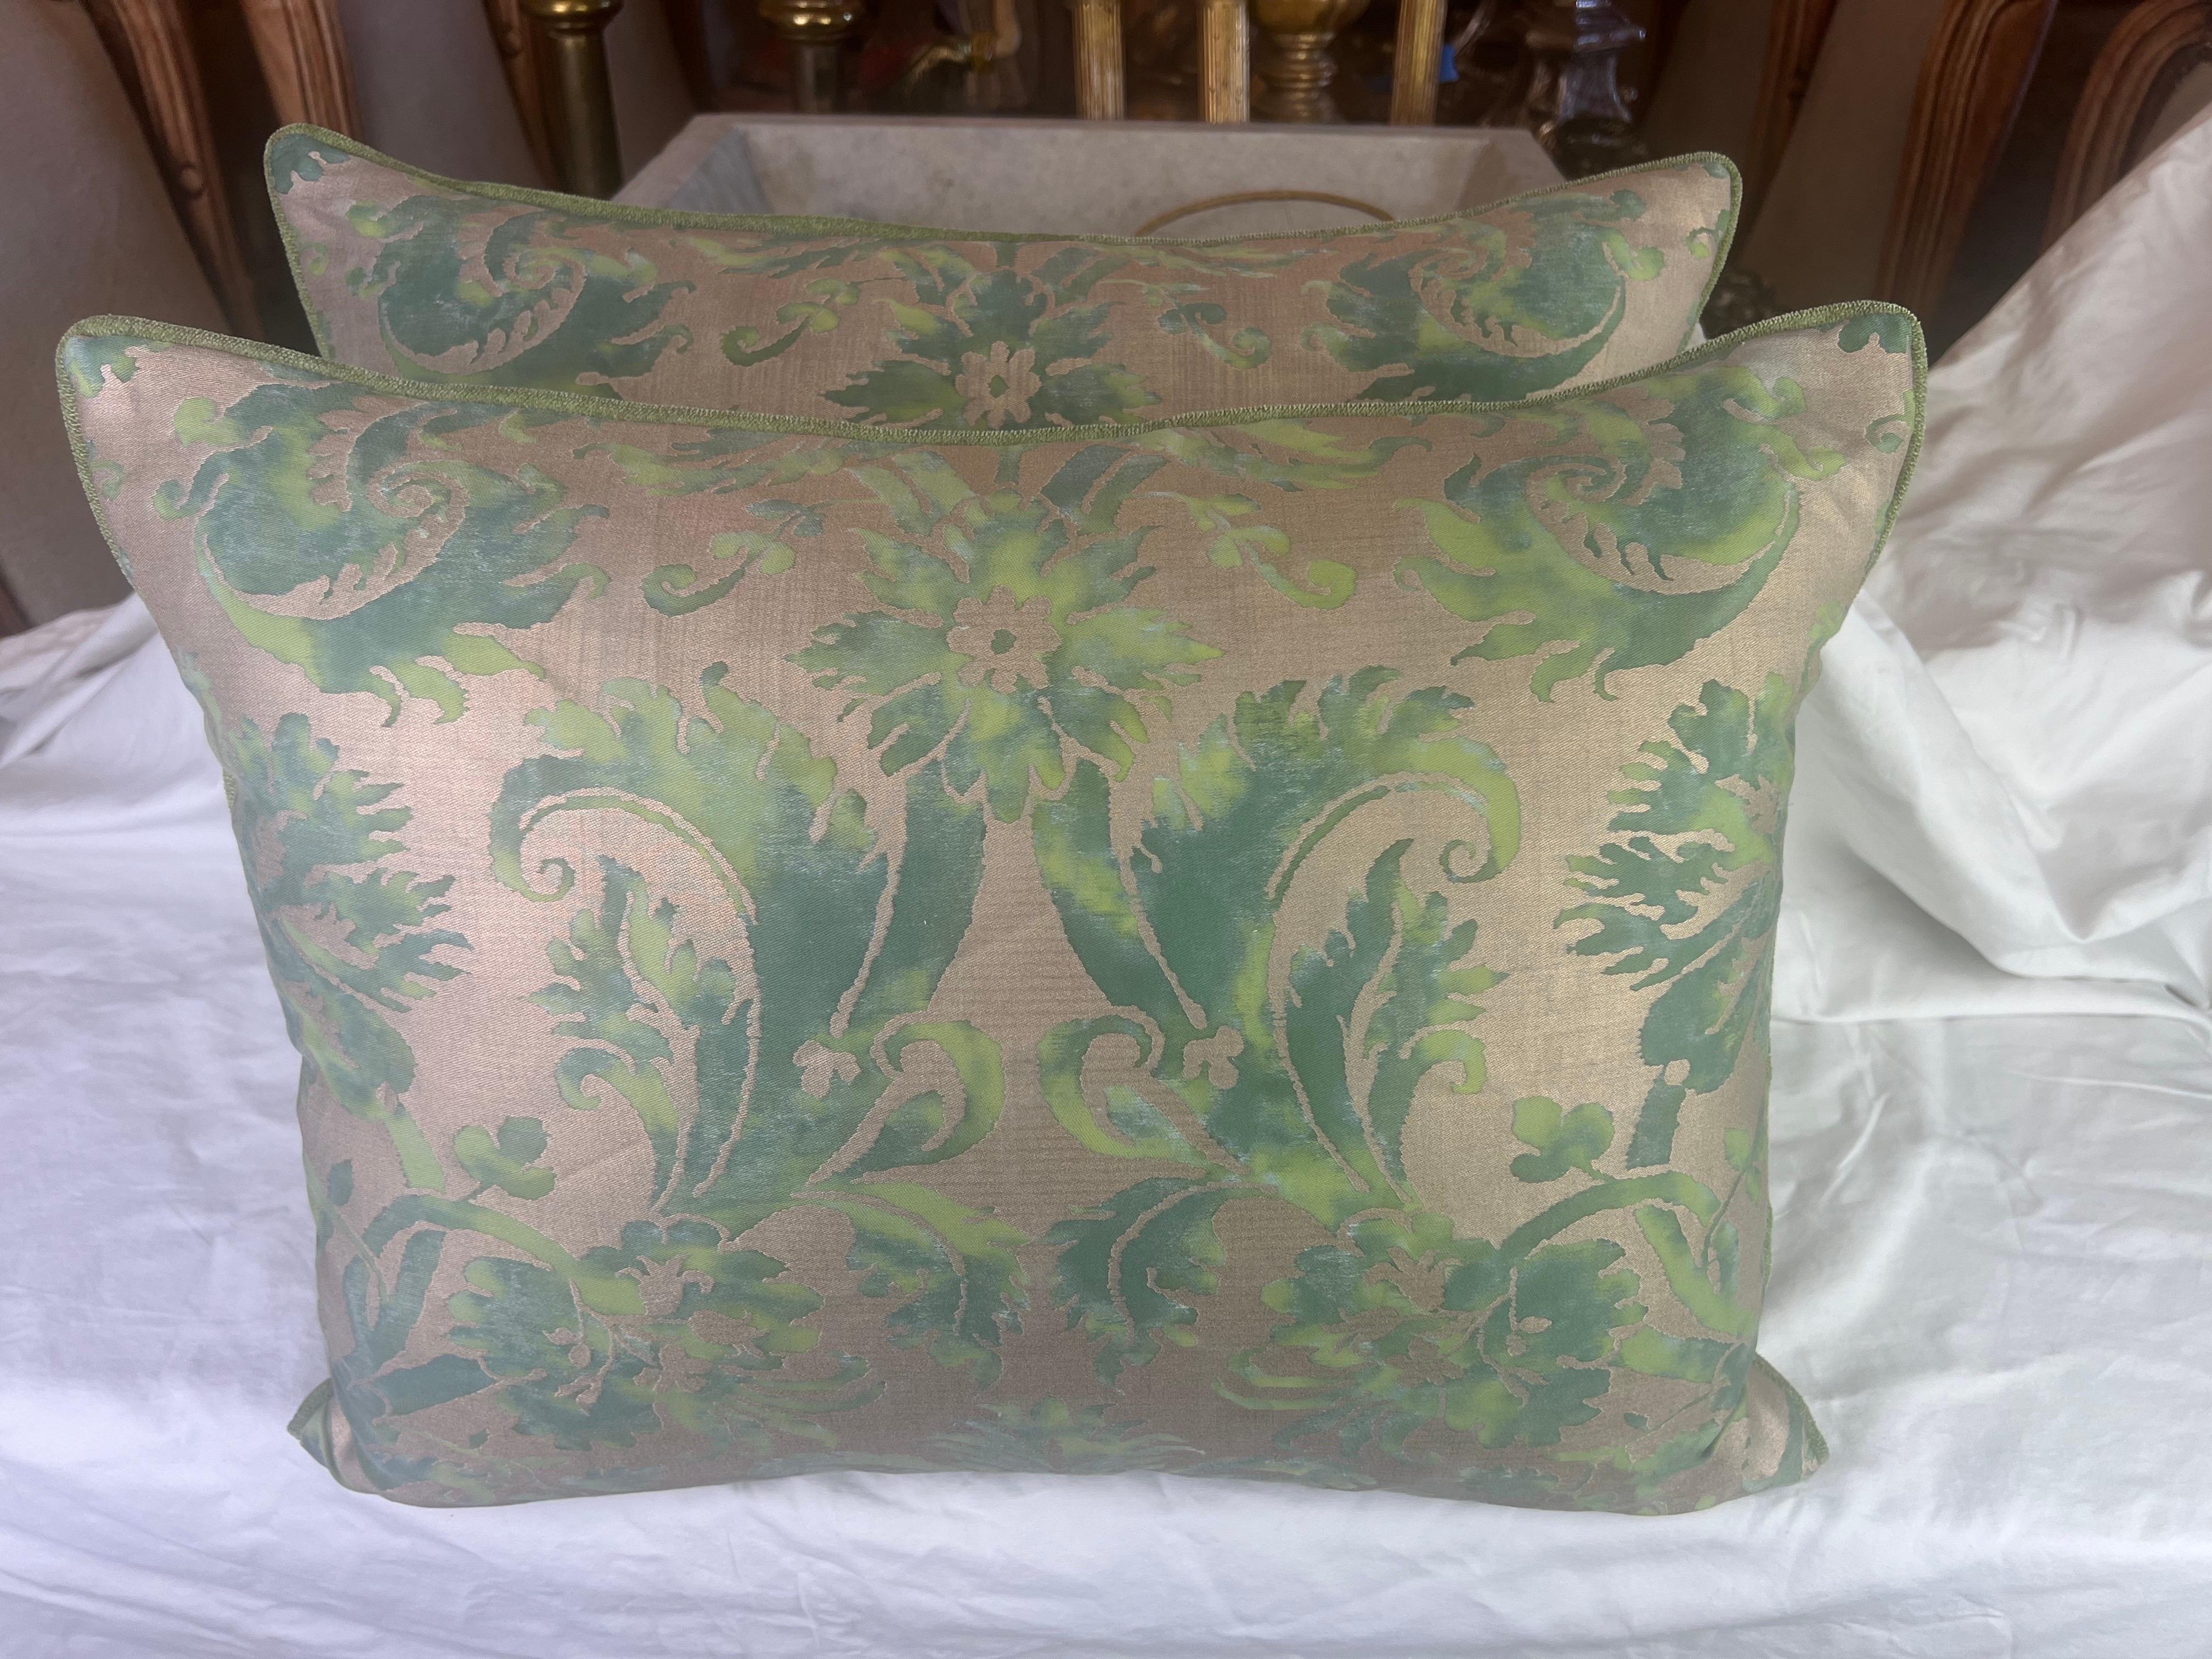 Pair of custom DeMedici Patterned Fortuny Pillows in a vibrant green/blue coloration.  The backs are a soft green chenille textile that coordinates beautifully.  Down inserts, zipper closures.